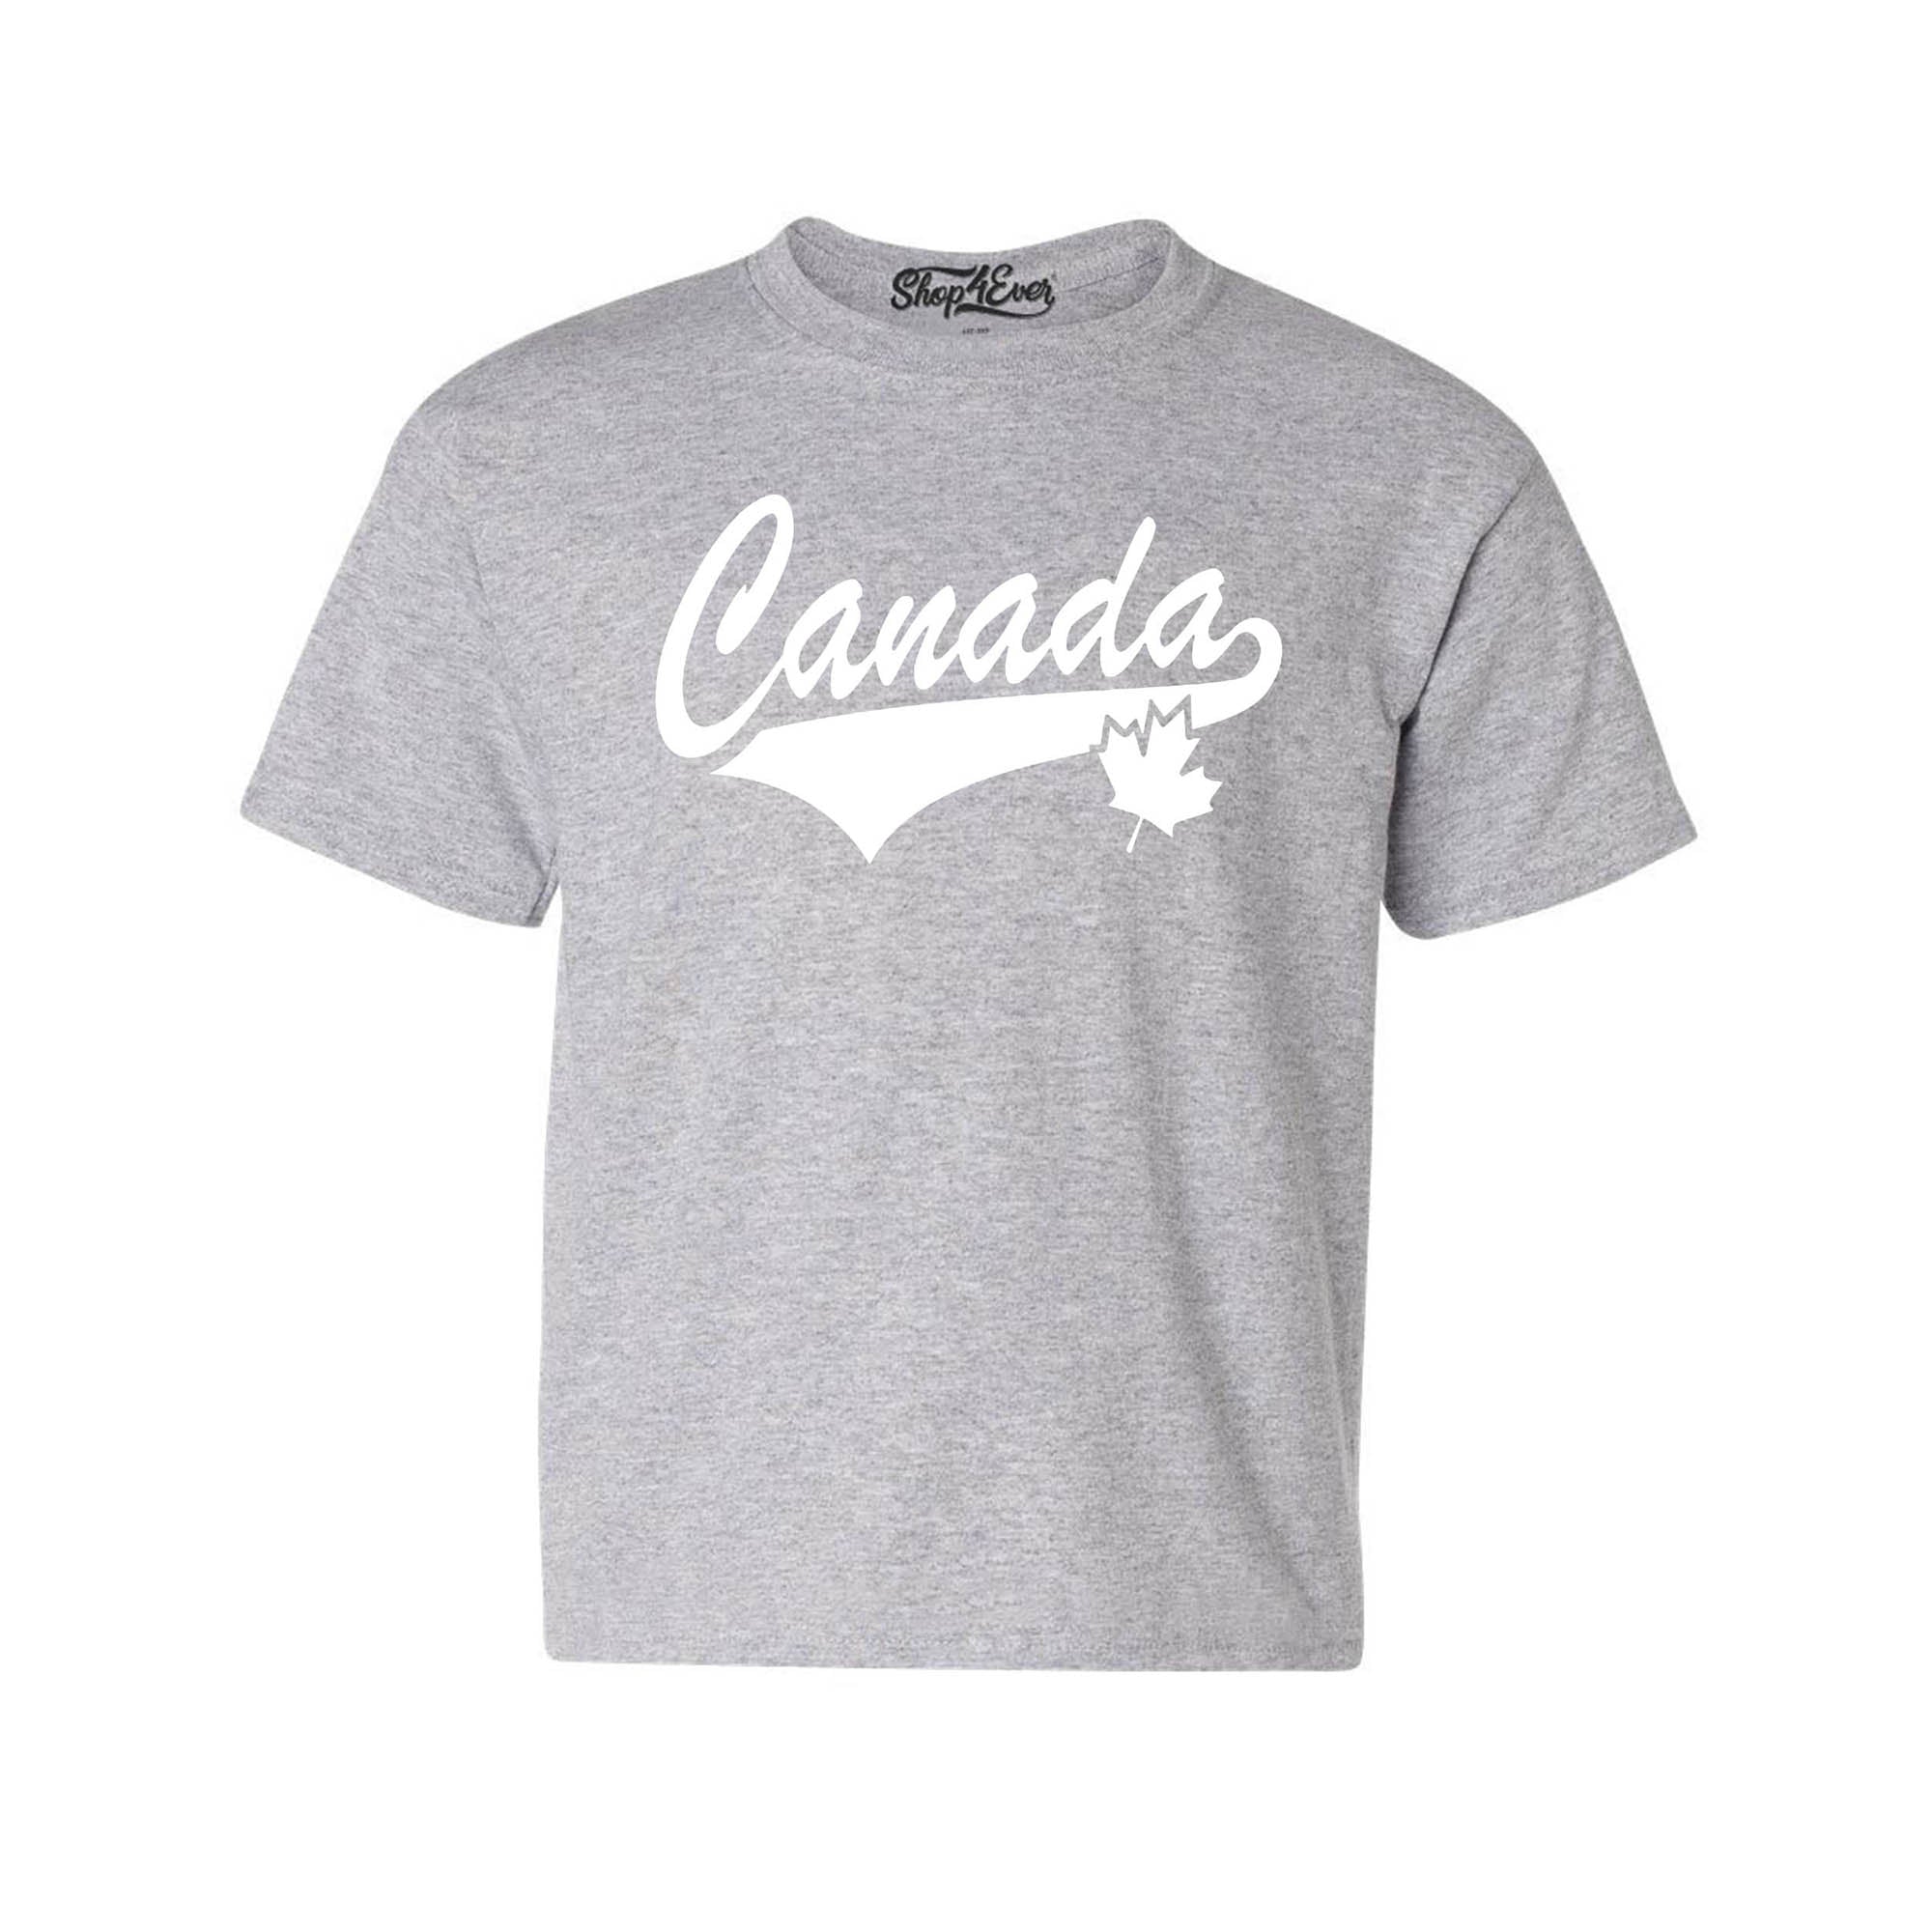 Canada White Youth's T-Shirt Canadian Child Kids